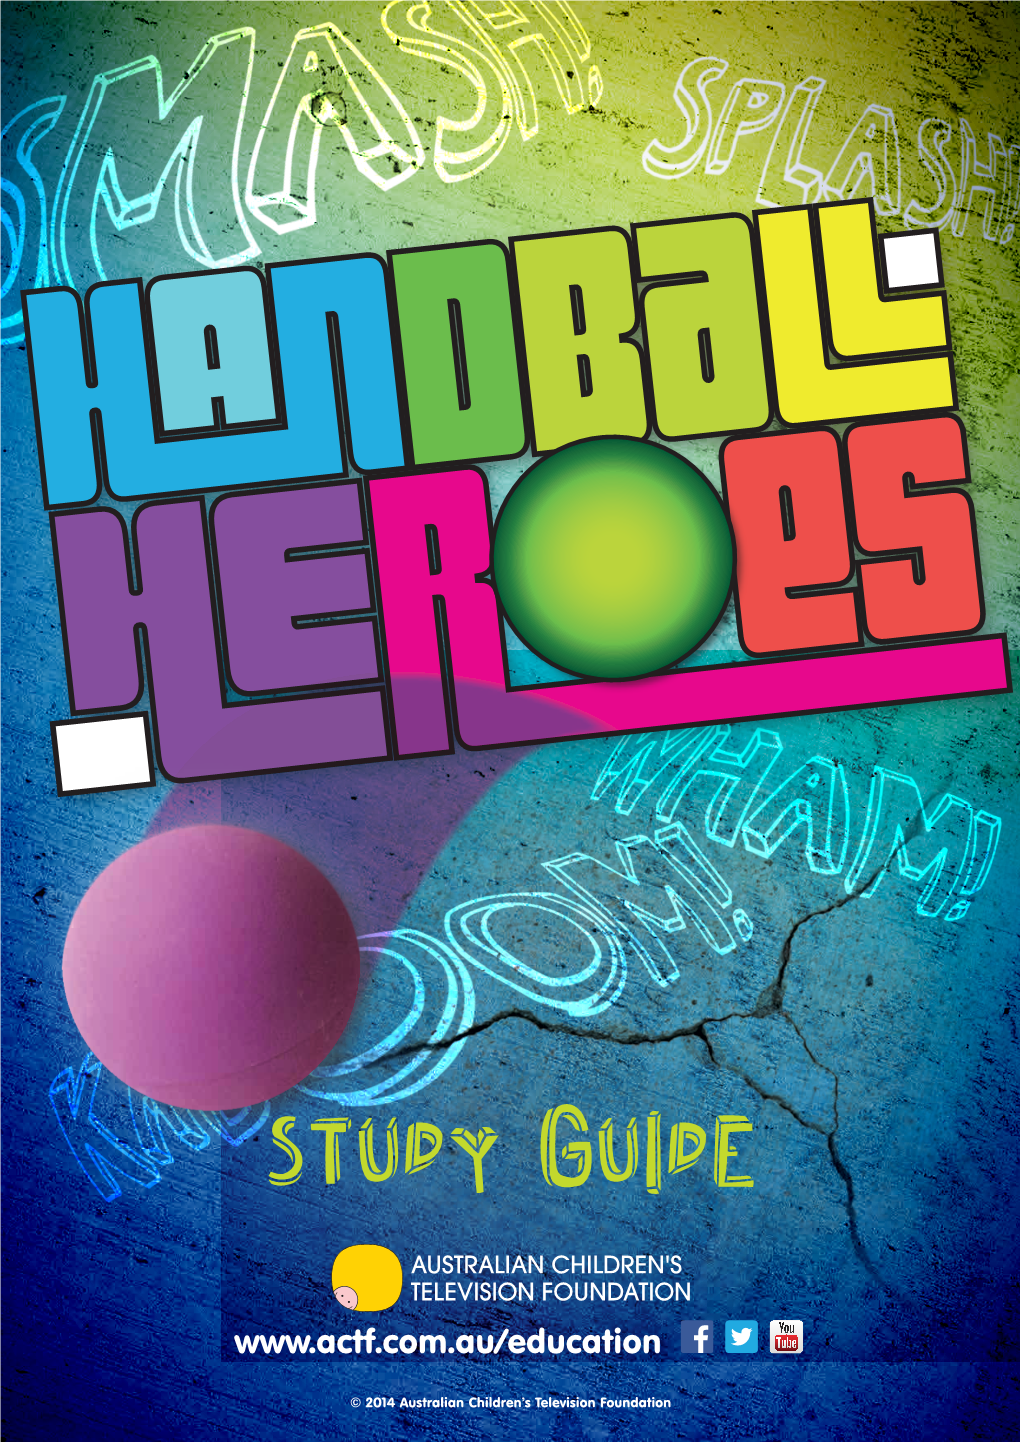 Handball Heroes Study Guide Explores the Cultural and Historical Relevance and Significance Concepts Such As Heritage and Culture, Community of the Game